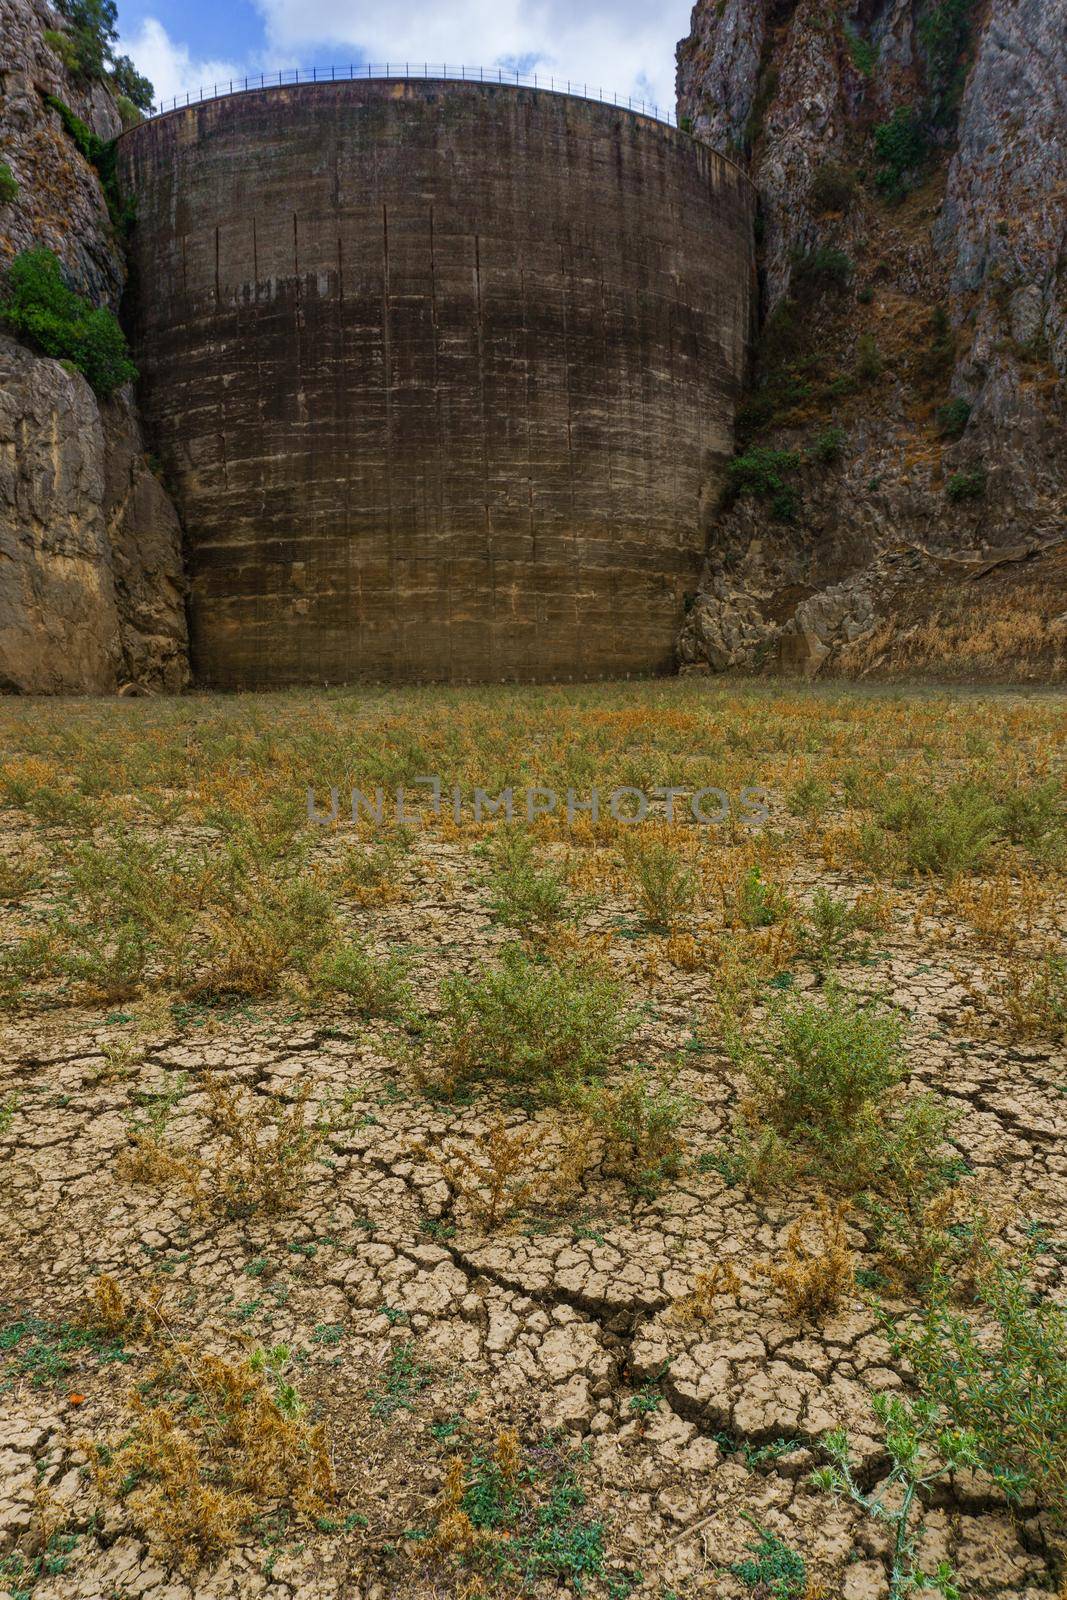 dry swamp bottom with cracked earth, in the background the dam without water due to the drought. by joseantona